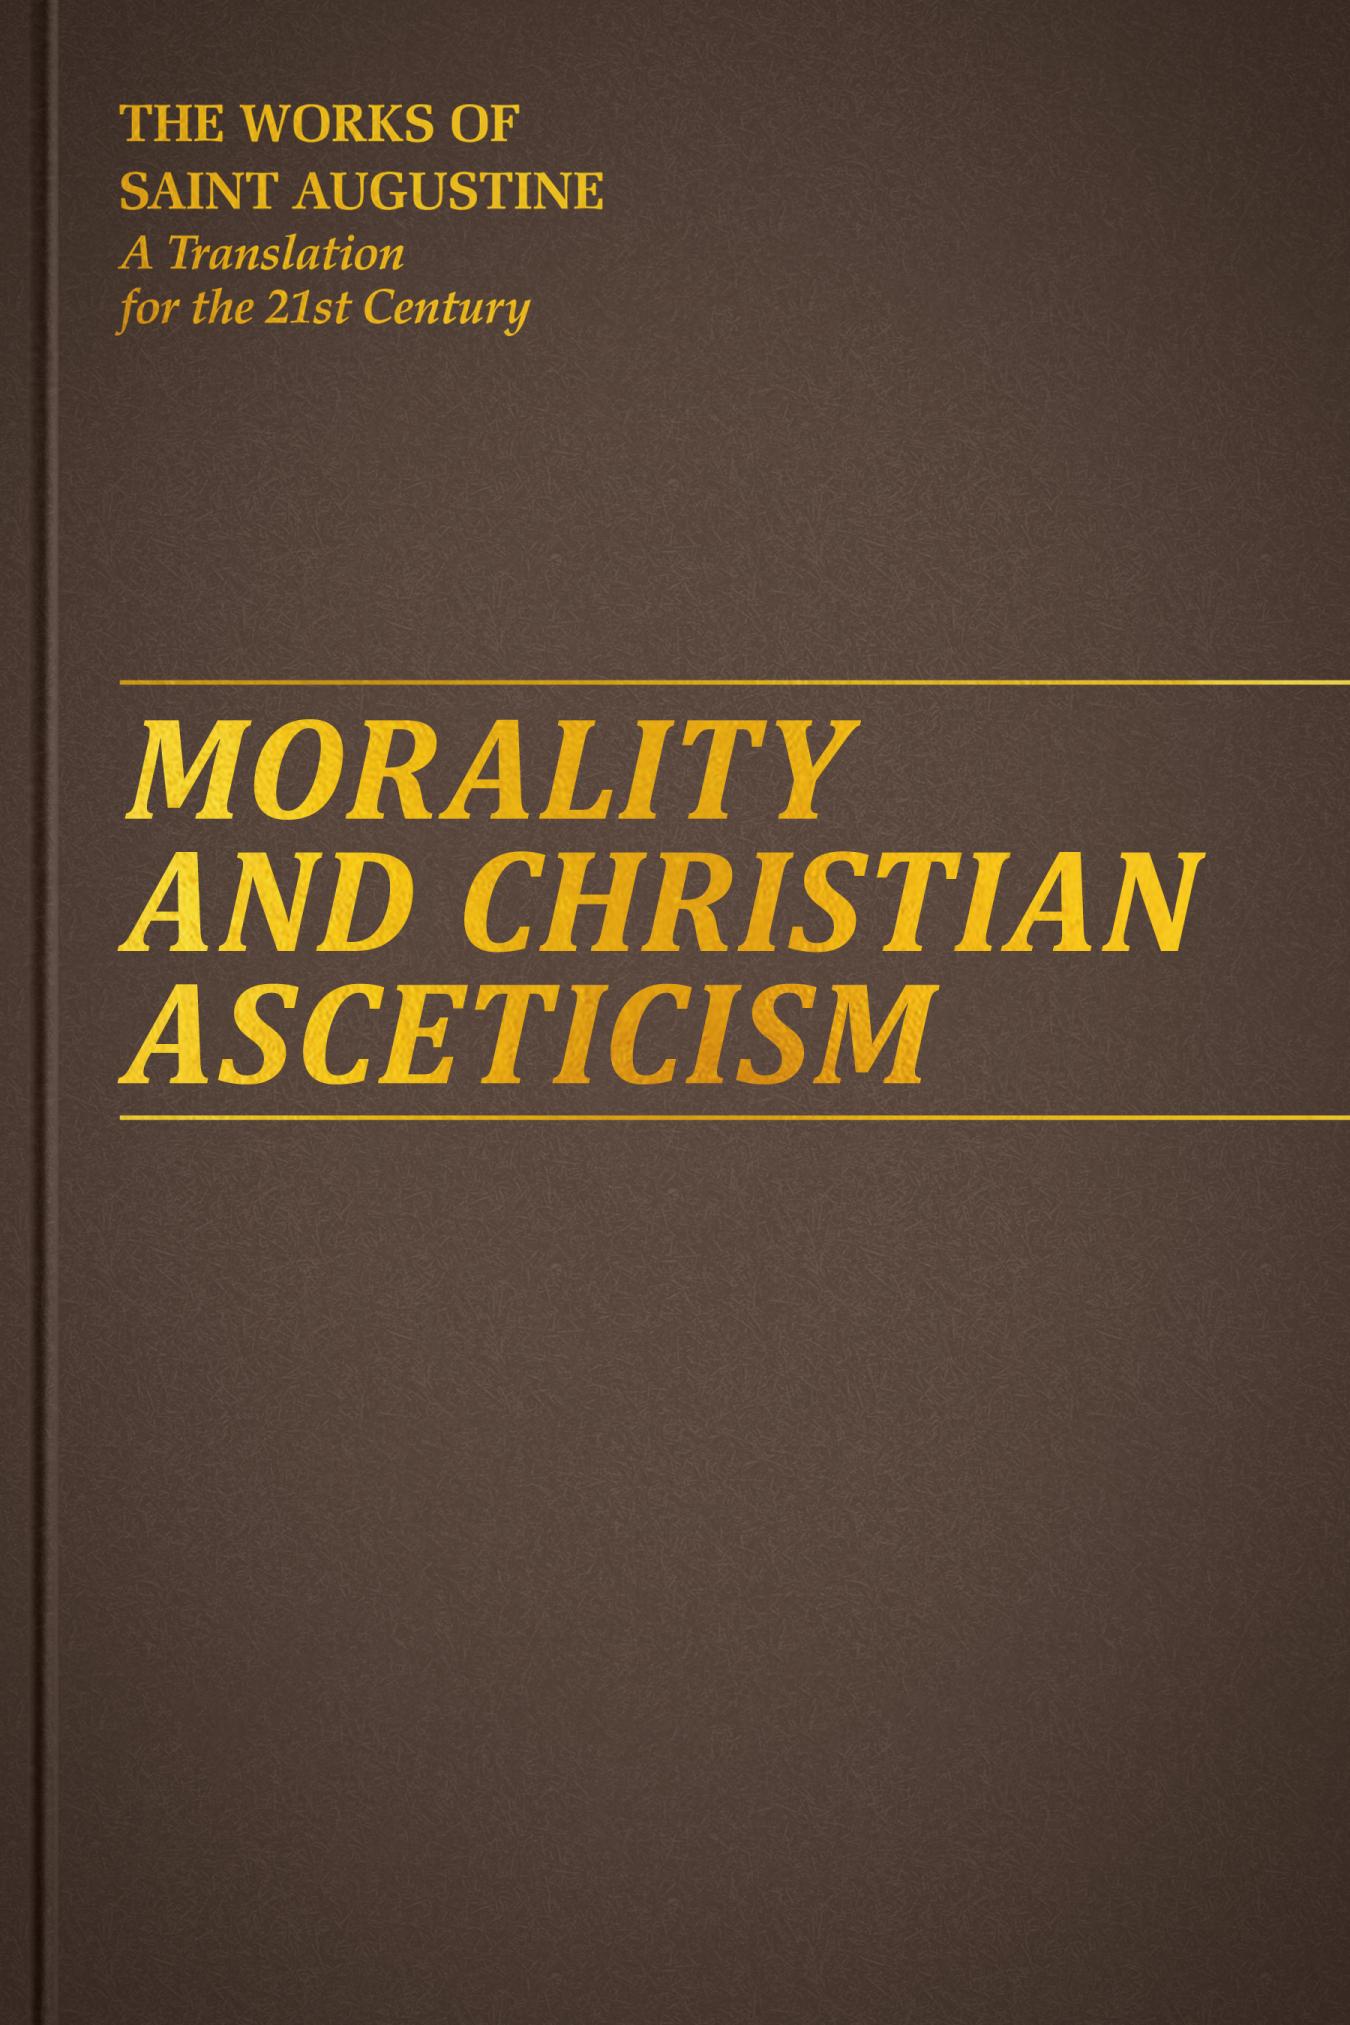 Morality and Asceticism, Saint Augustine